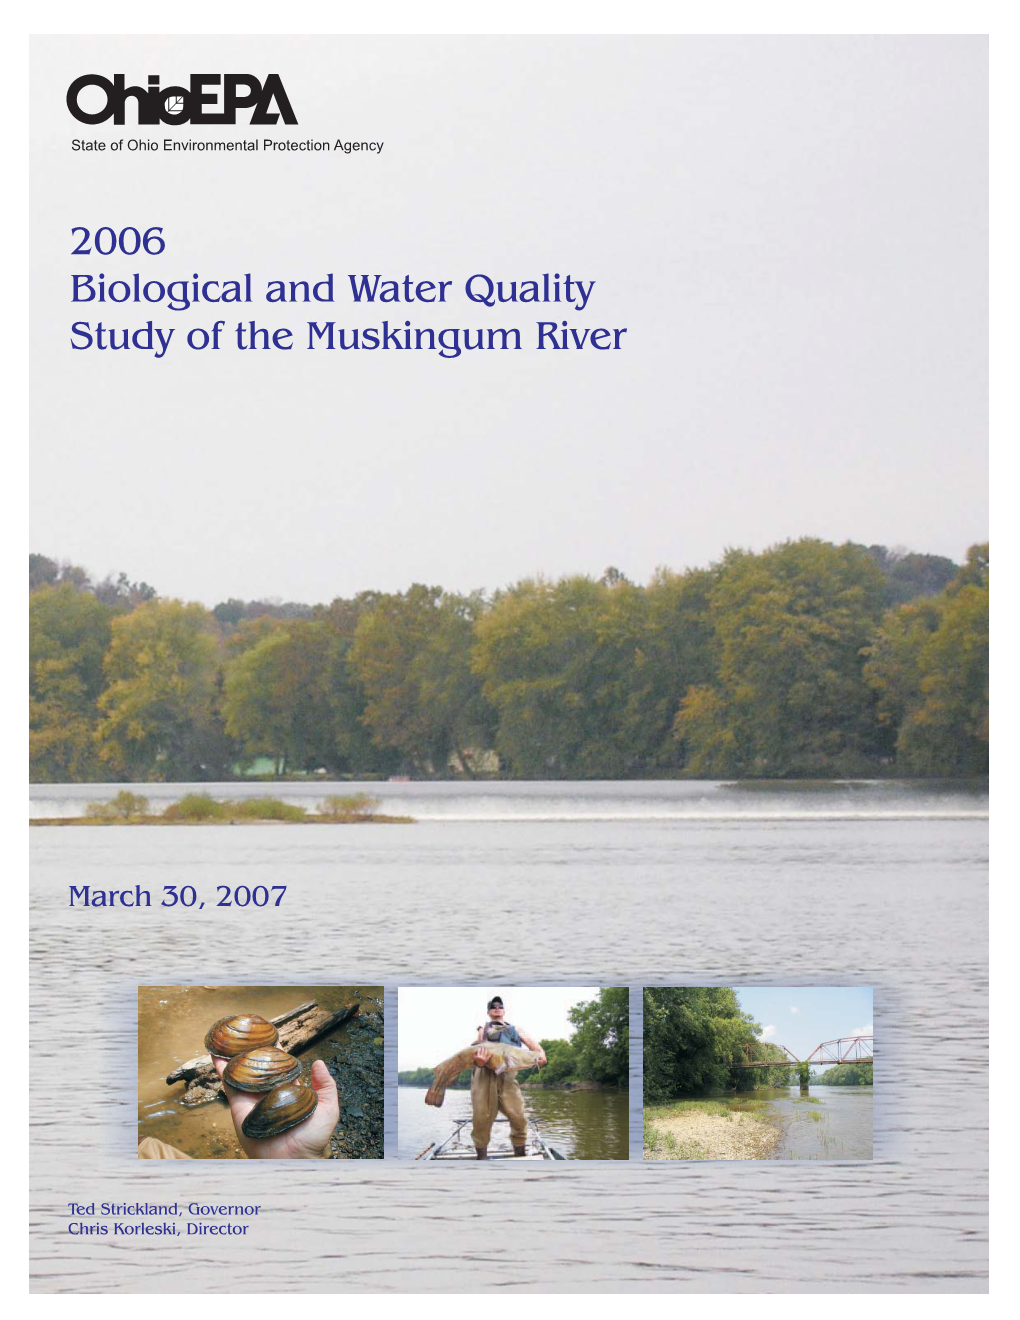 2006 Biological and Water Quality Study of the Muskingum River